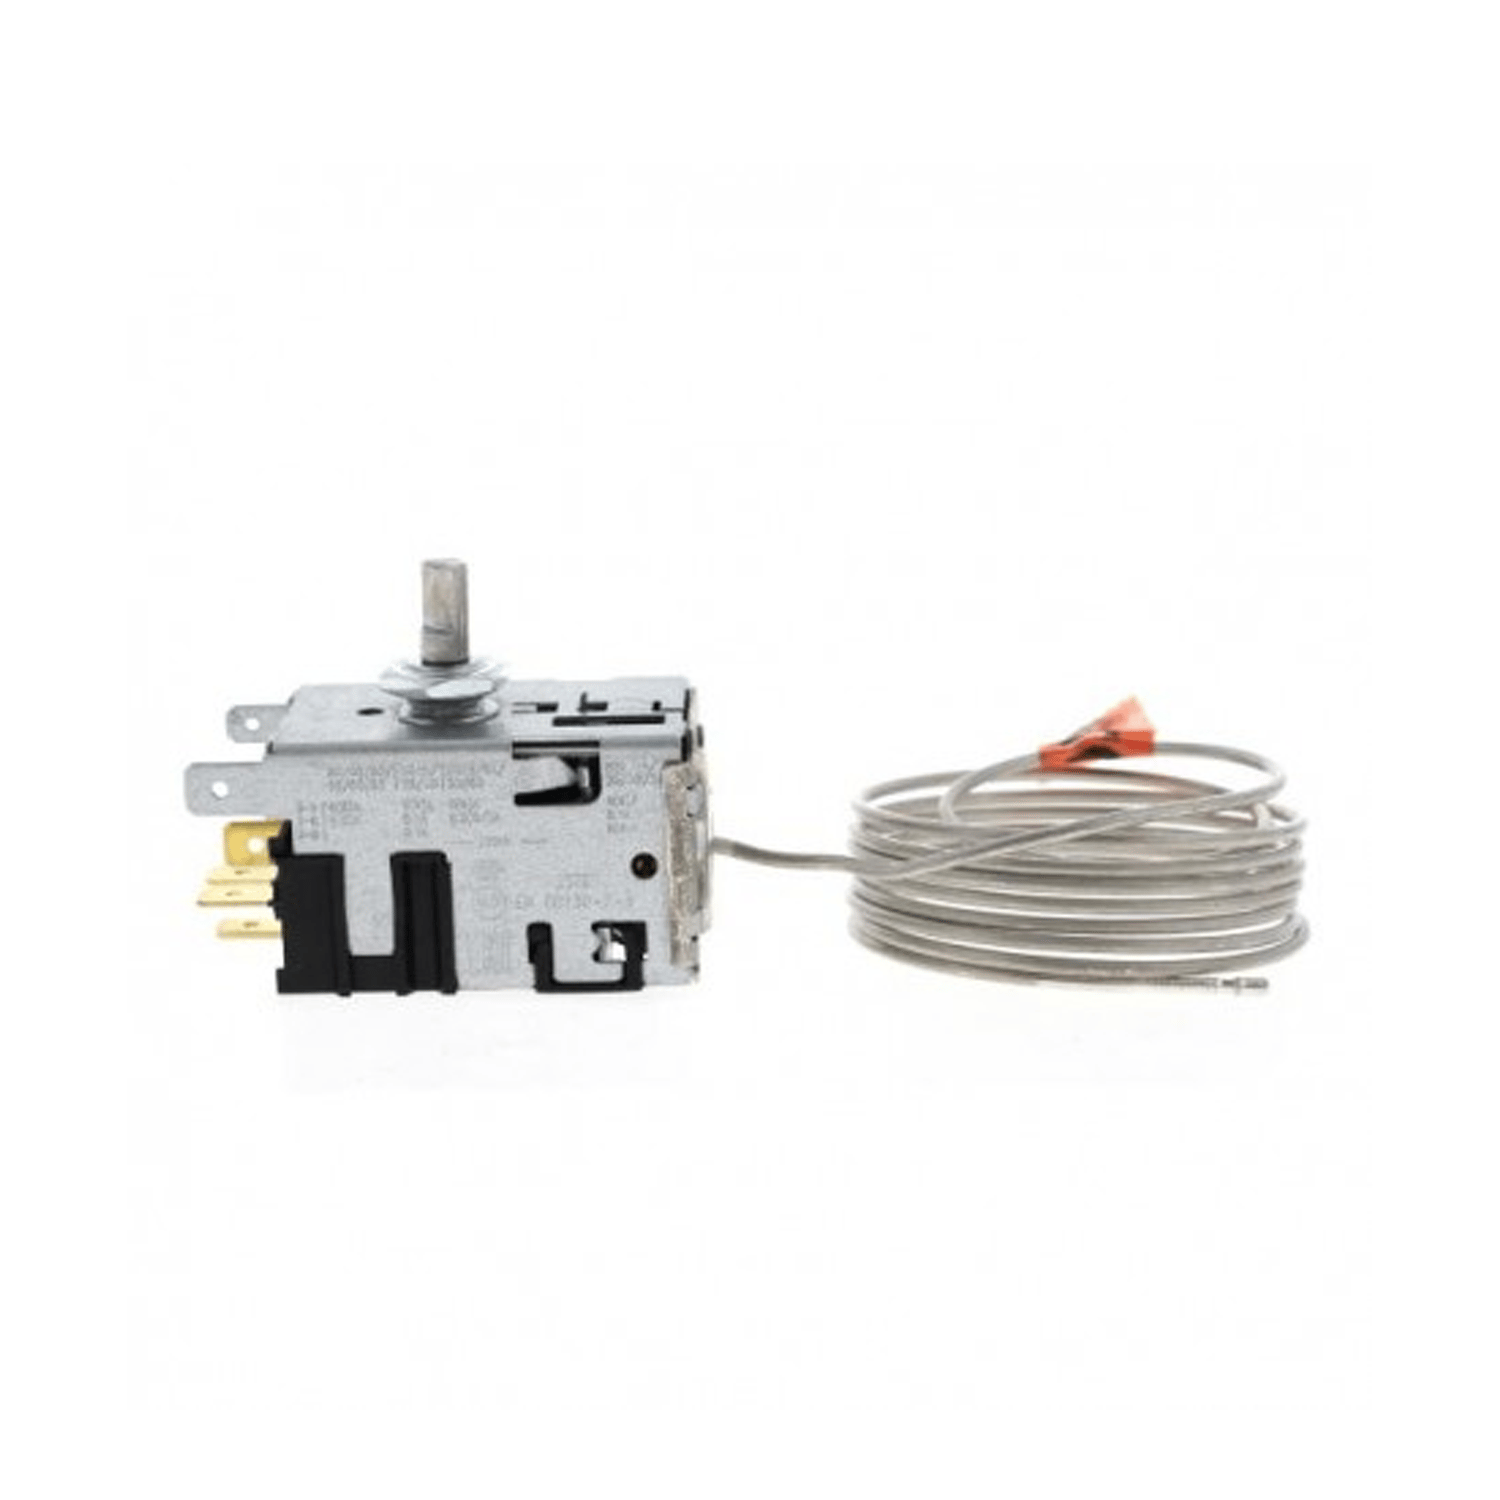 Thermostat Atea A13-0552 (077B-6756 can also be supplied as an alternative) for WHIRLPOOL/INDESIT refrigerator, warm: from -18° on +4°; cold: from -32° on +4°,L 1500 mm